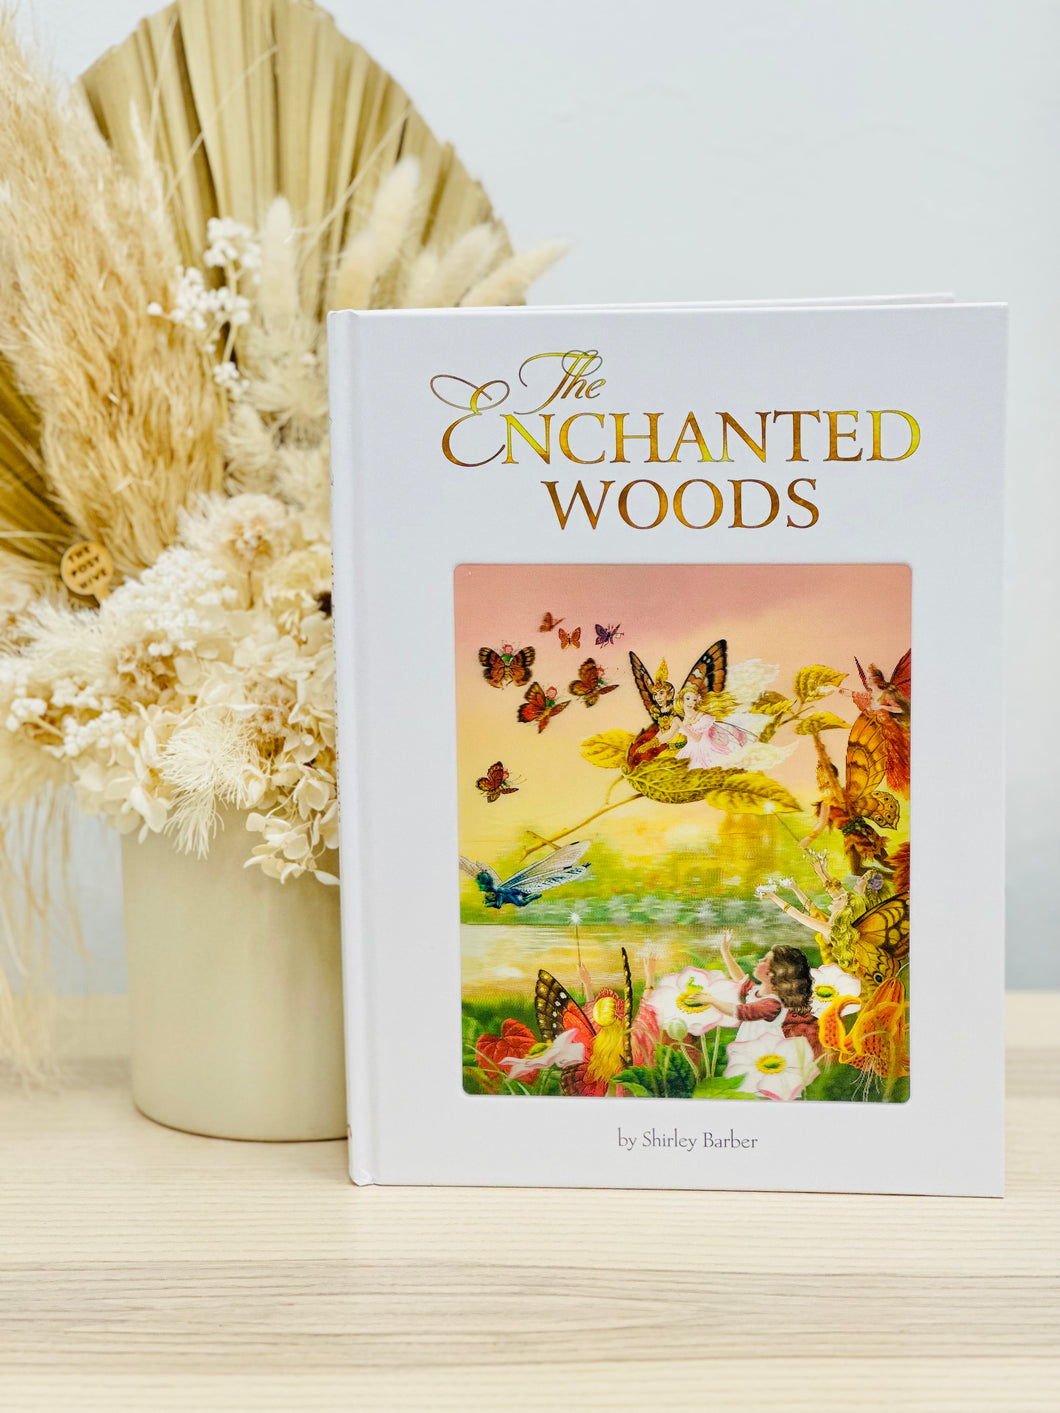 Shirley Barber's Enchanted Woods